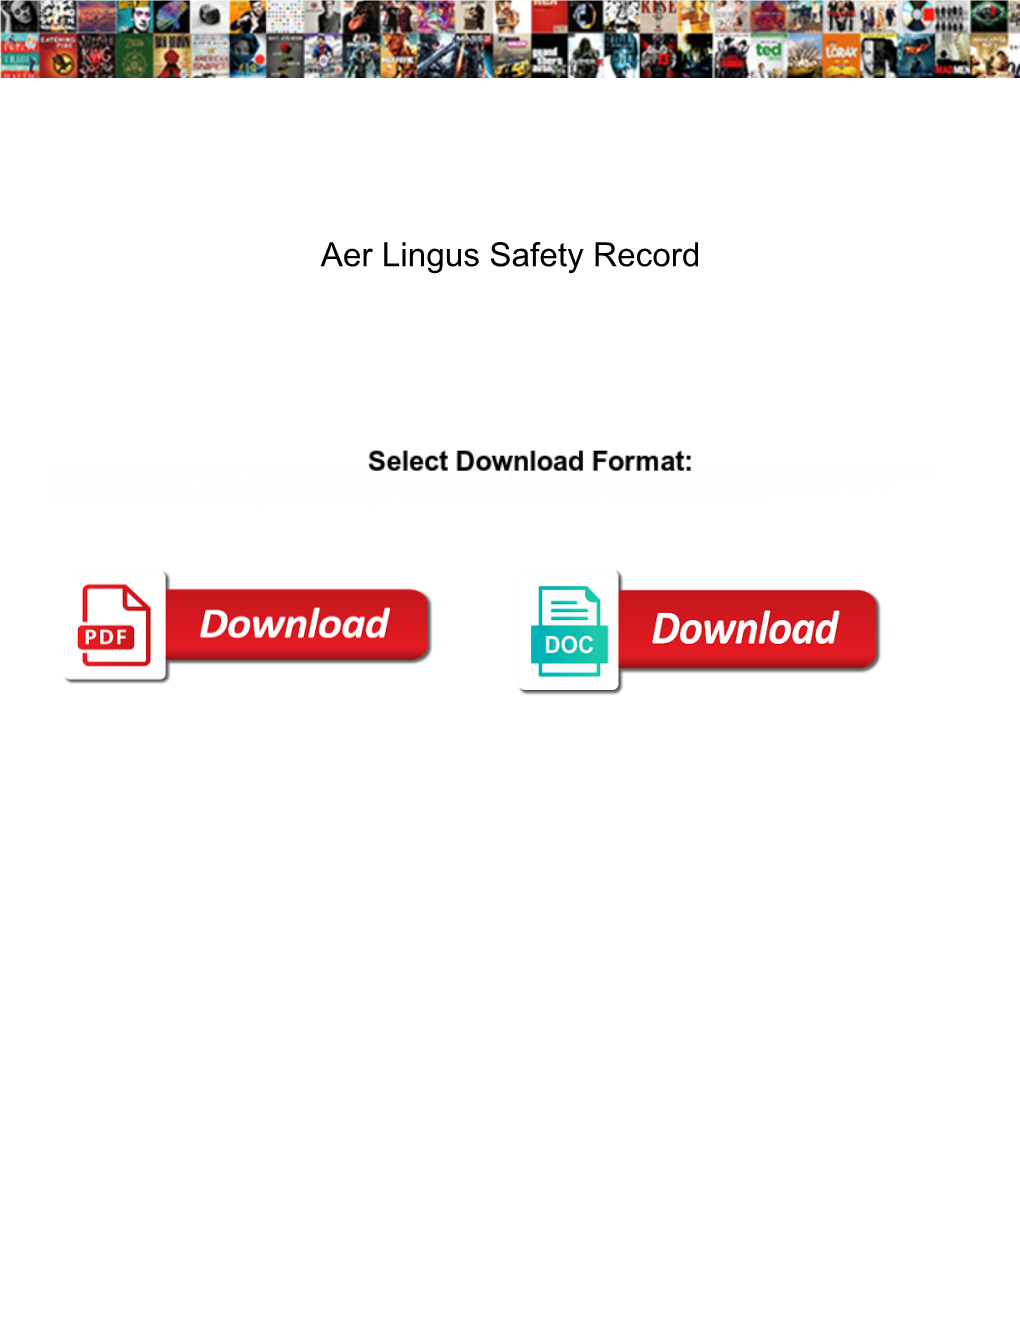 Aer Lingus Safety Record